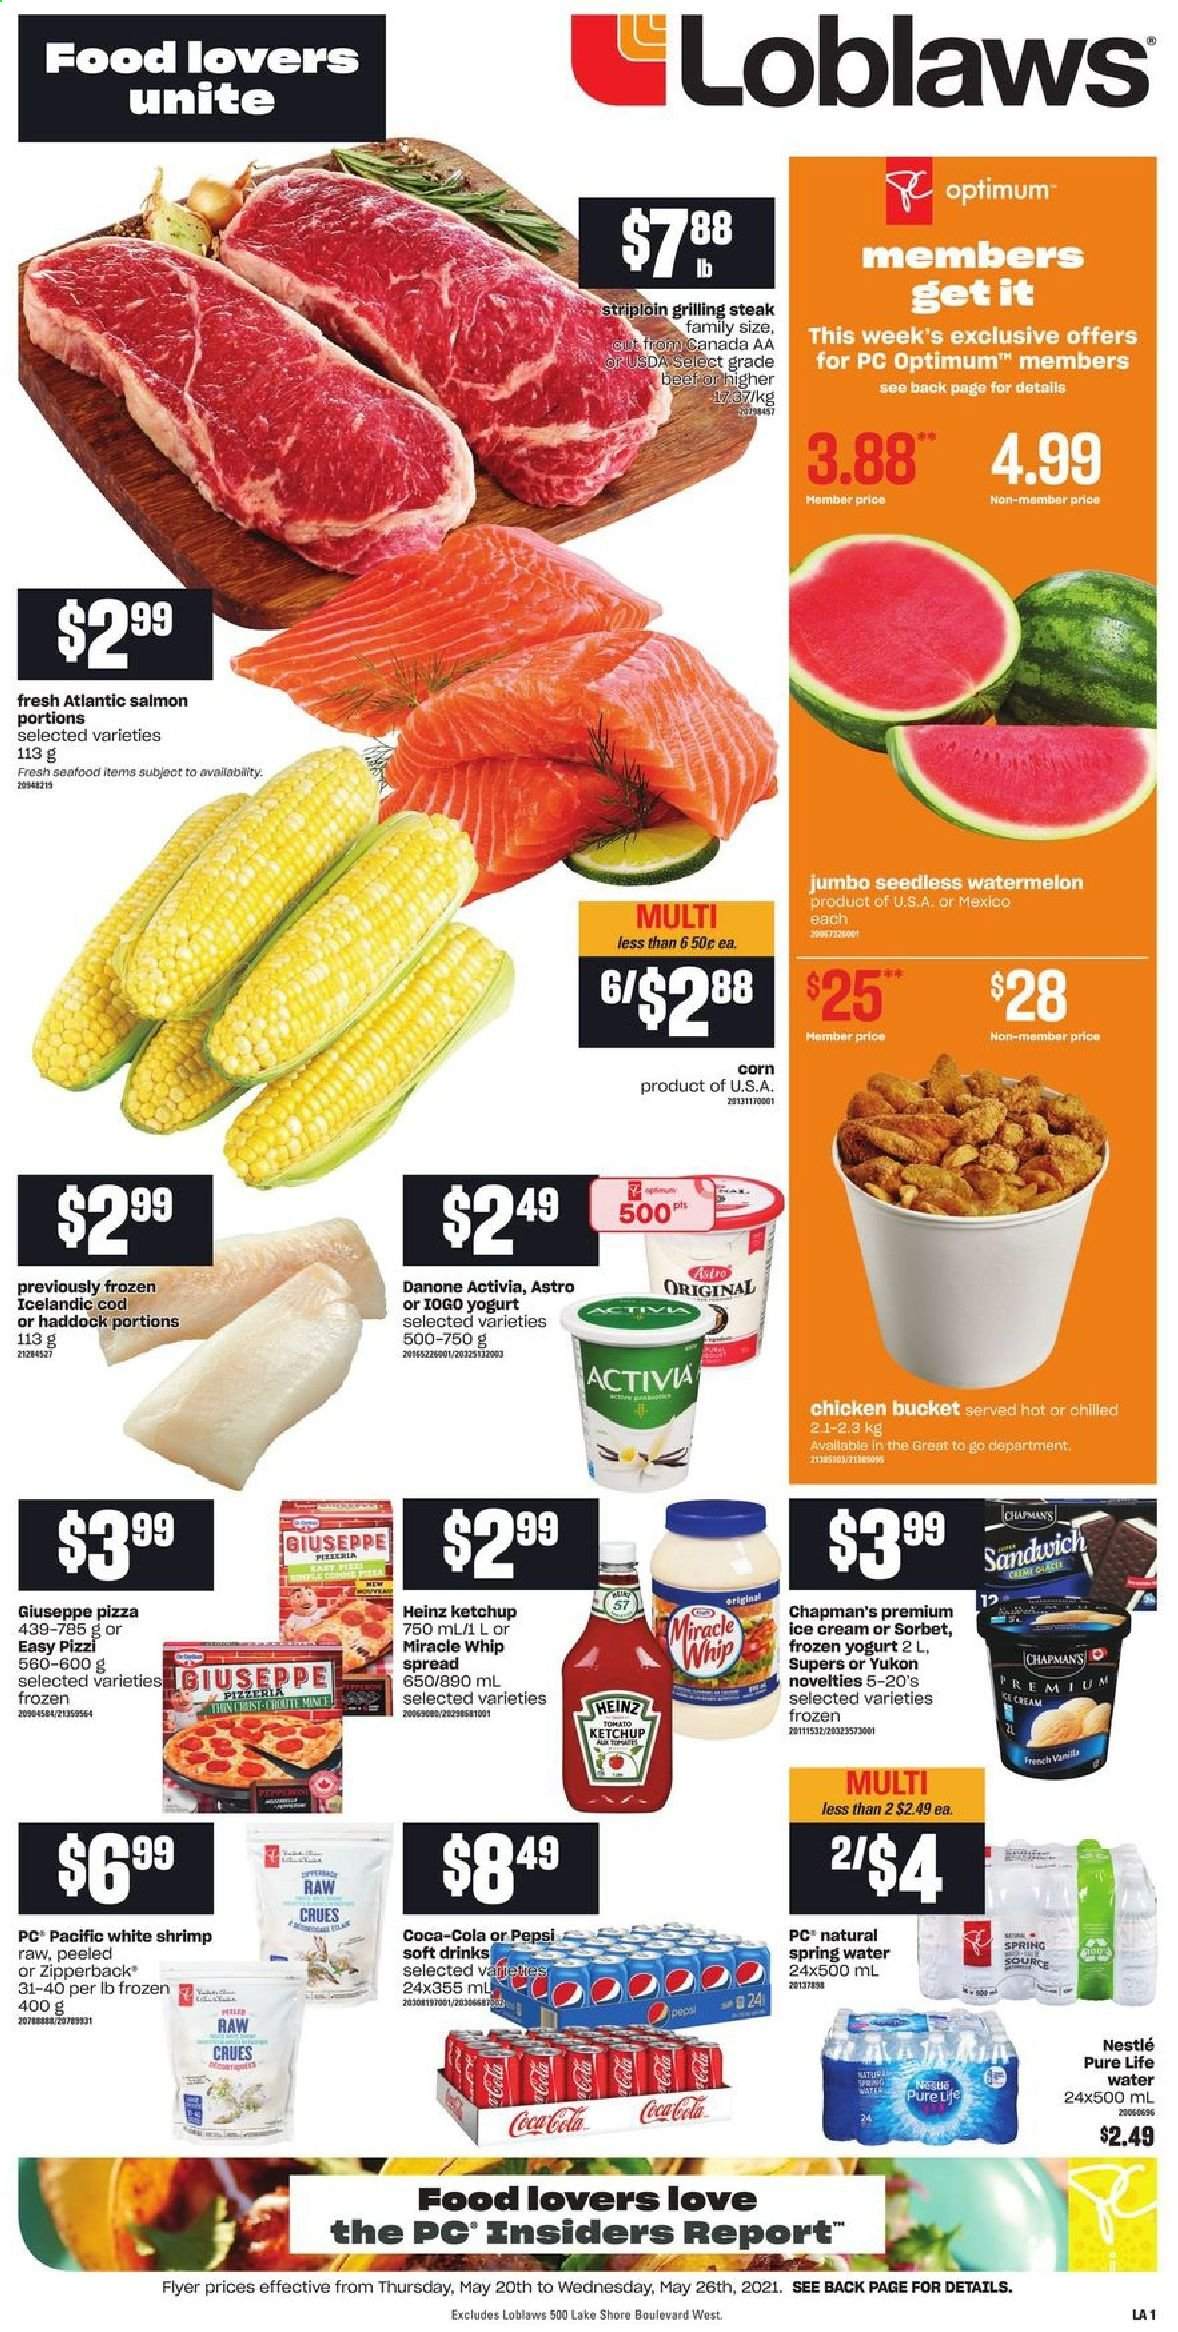 thumbnail - Loblaws Flyer - May 20, 2021 - May 26, 2021 - Sales products - corn, watermelon, cod, salmon, haddock, seafood, shrimps, pizza, sandwich, yoghurt, Activia, Miracle Whip, ice cream, Heinz, Coca-Cola, Pepsi, soft drink, spring water, Pure Life Water, Optimum, Danone, Nestlé, steak. Page 1.